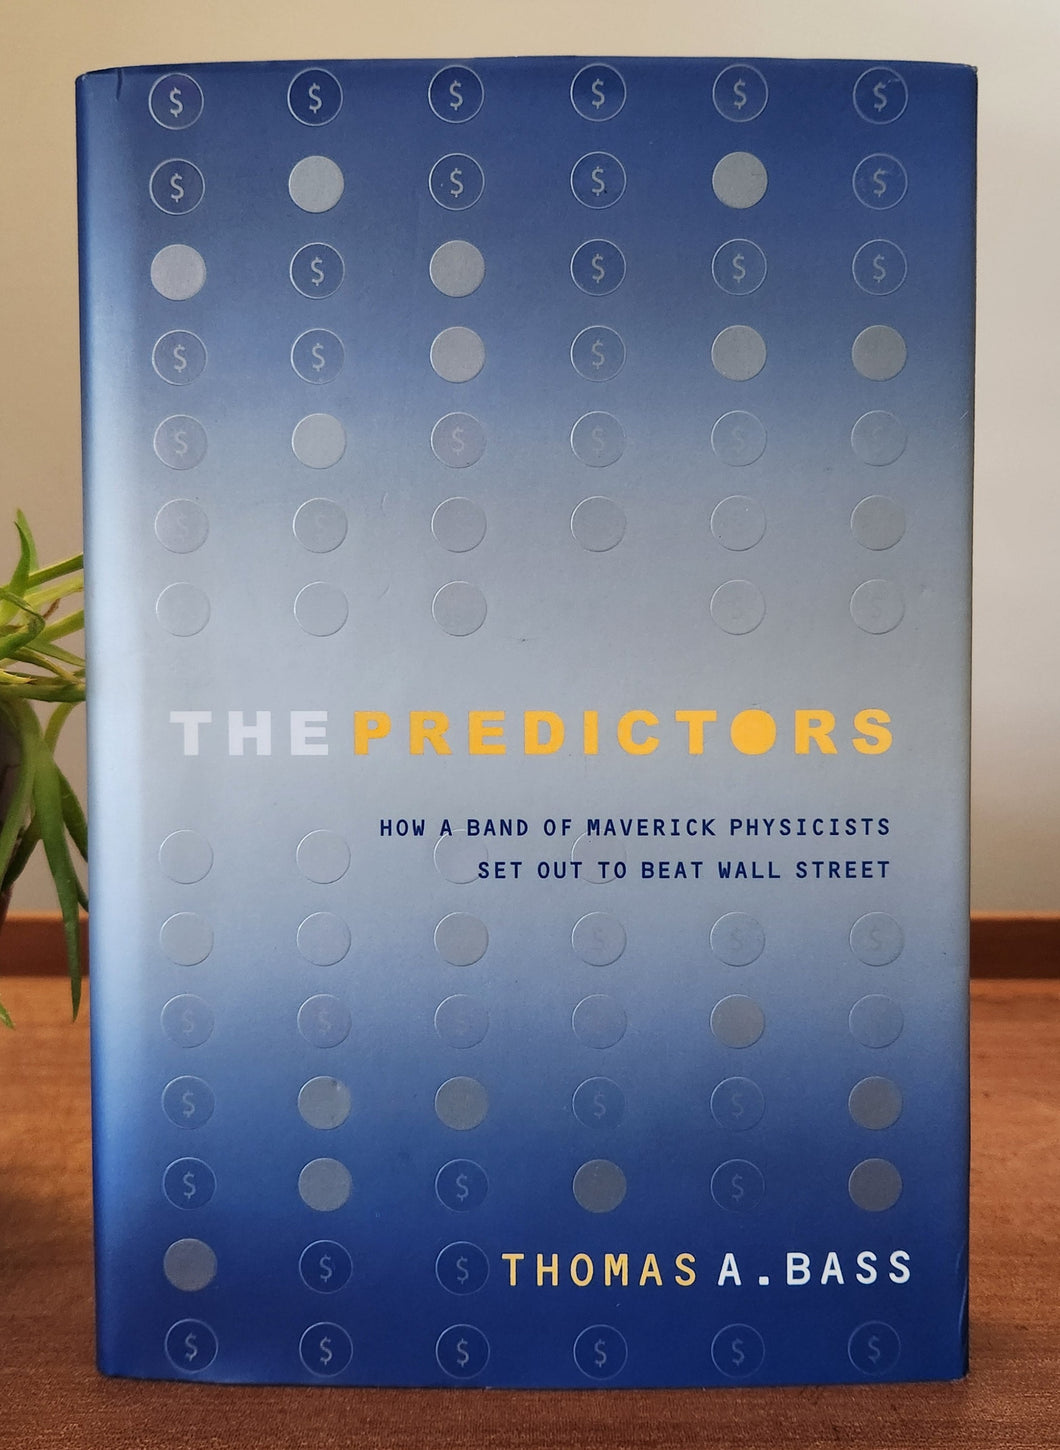 The Predictors: How a Band of Maverick Physicists Set Out to Beat Wall Street by Thomas A. Bass